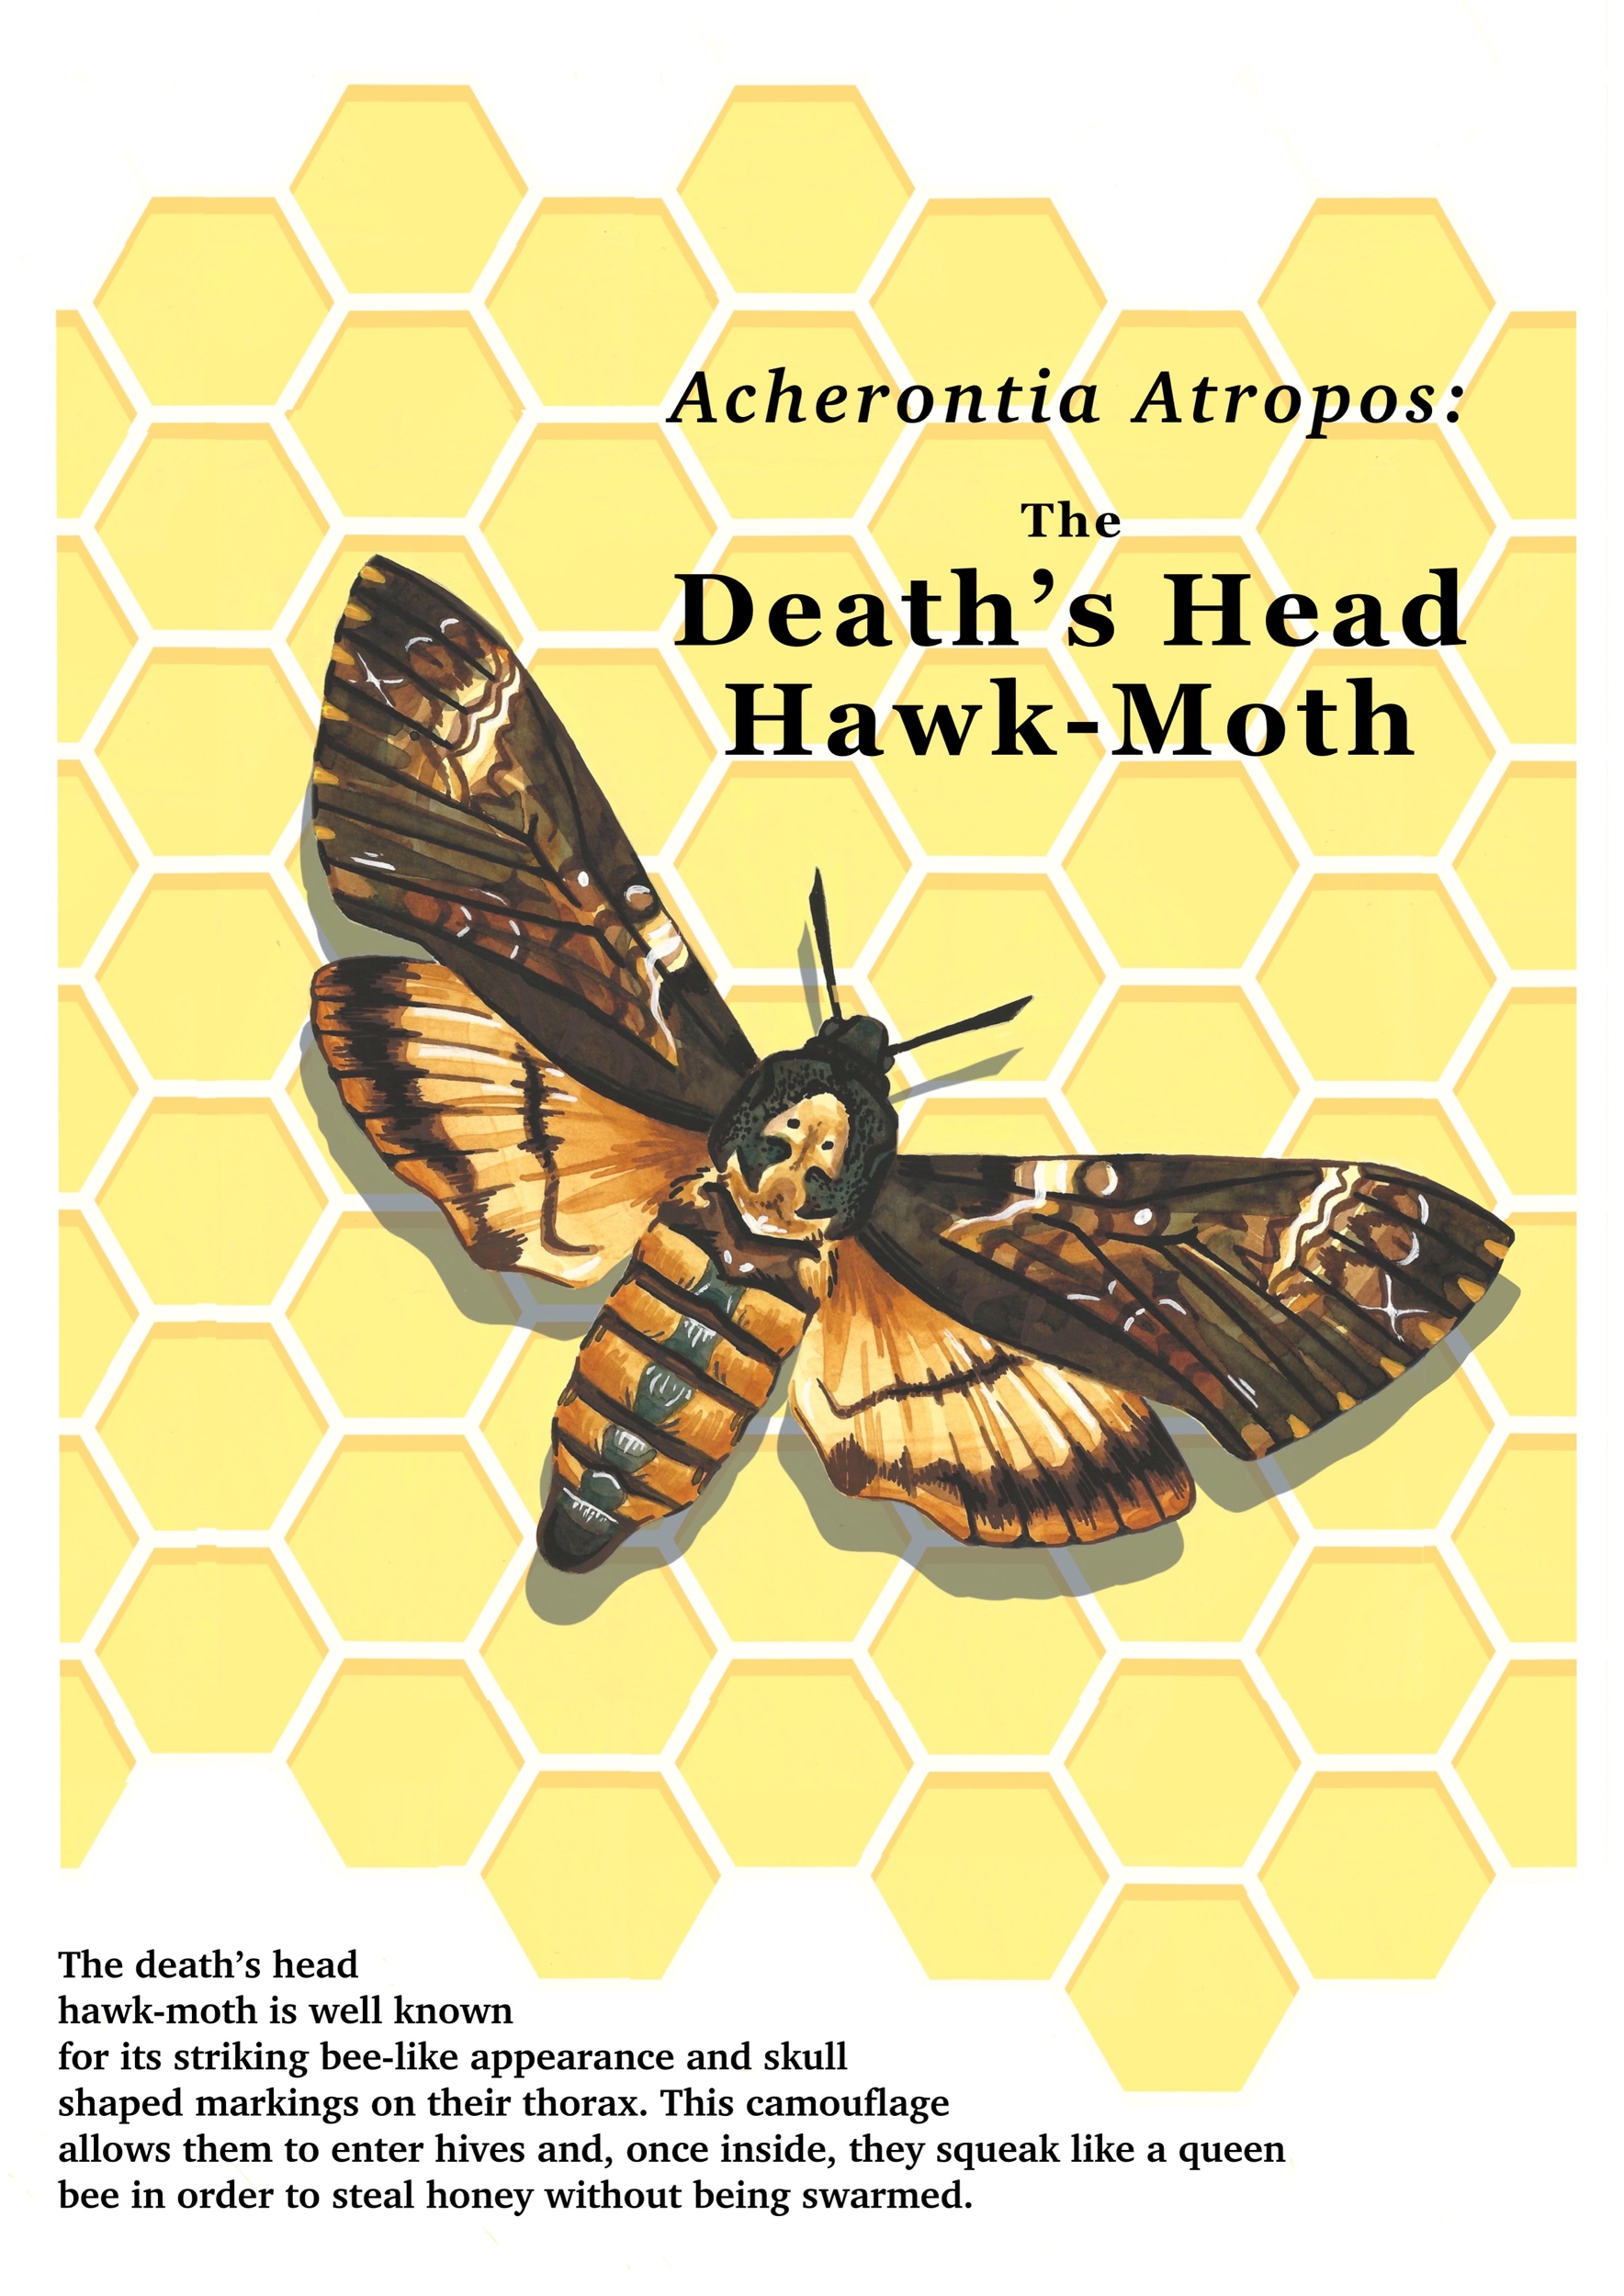 Illustration by Grace Bastion, showing a Death's Head Hawk-Moth over honeycomb with educational text.